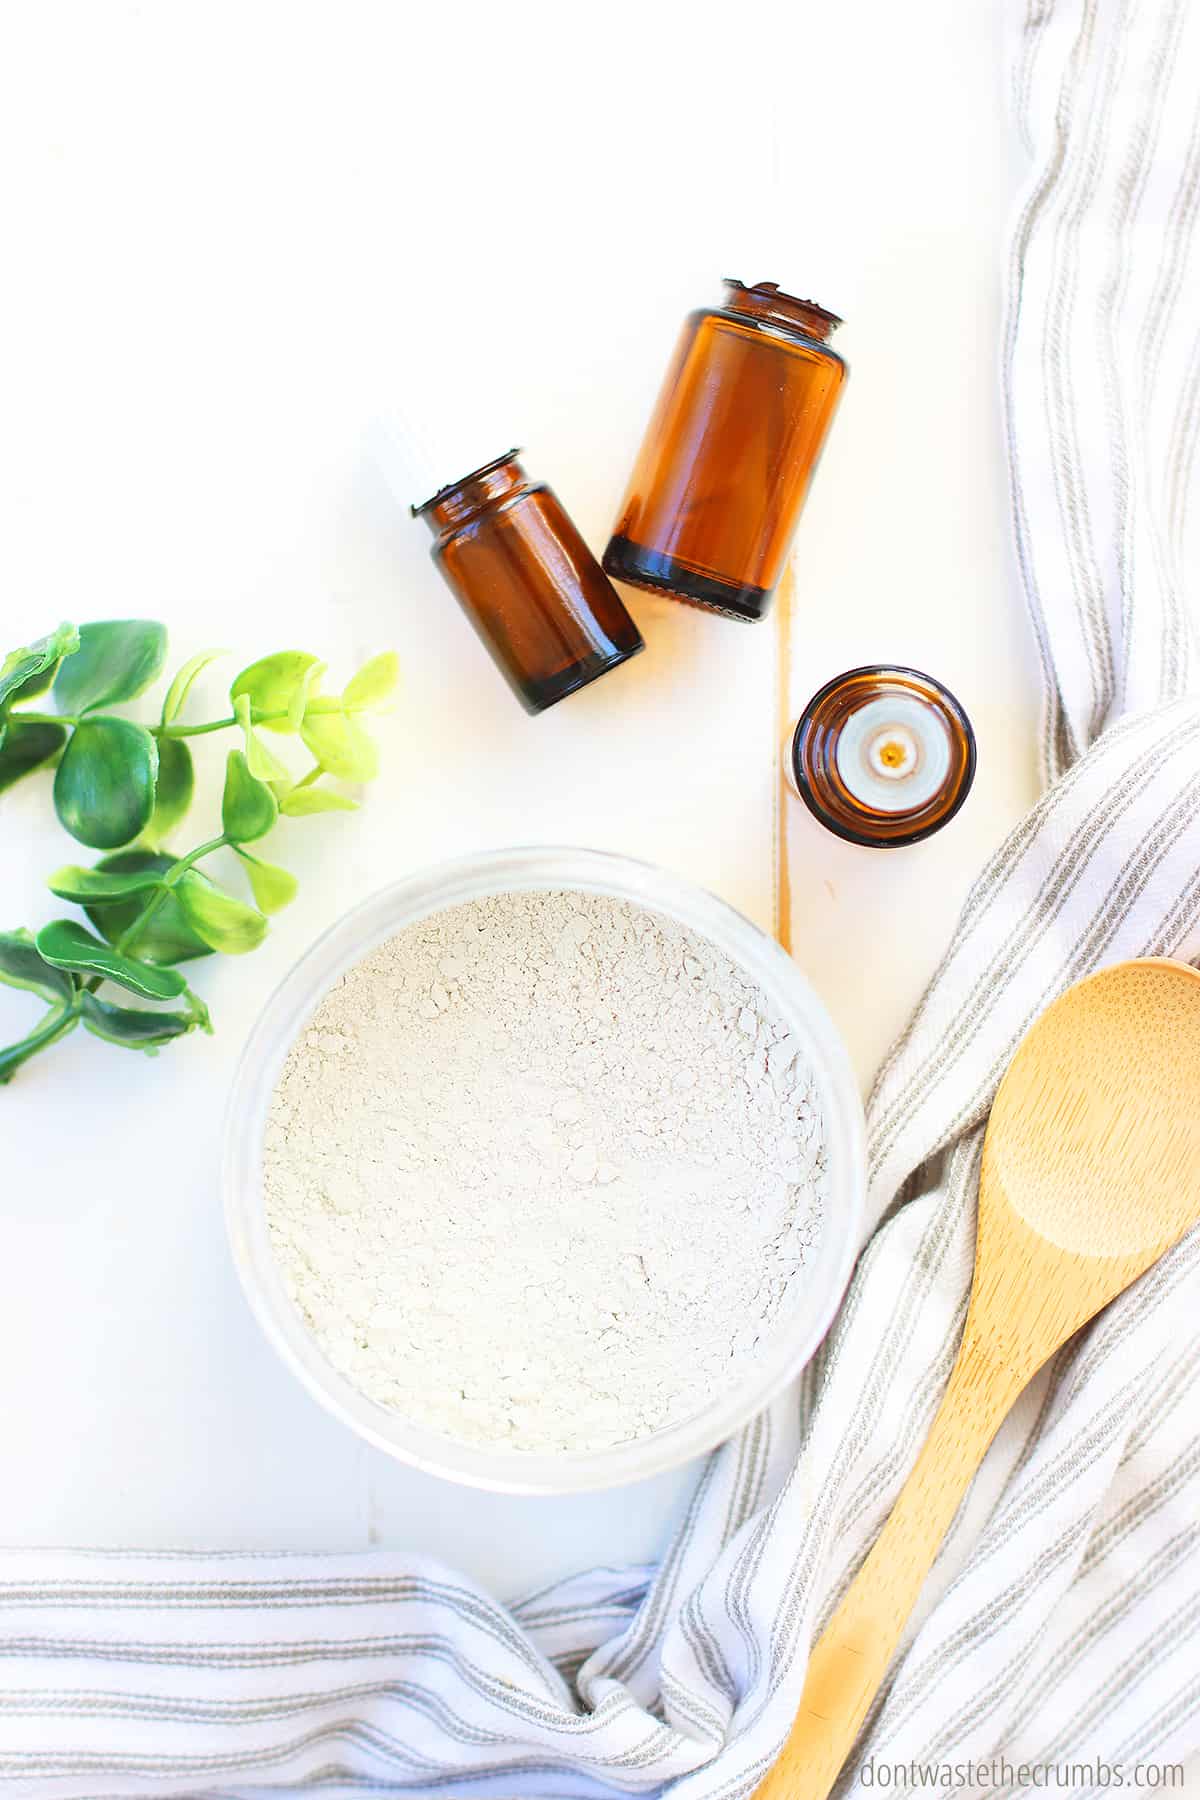 You'll need essential oils, bentonite clay, salt, sweetener, water and a wooden spoon to make your homemade remineralizing toothpaste.